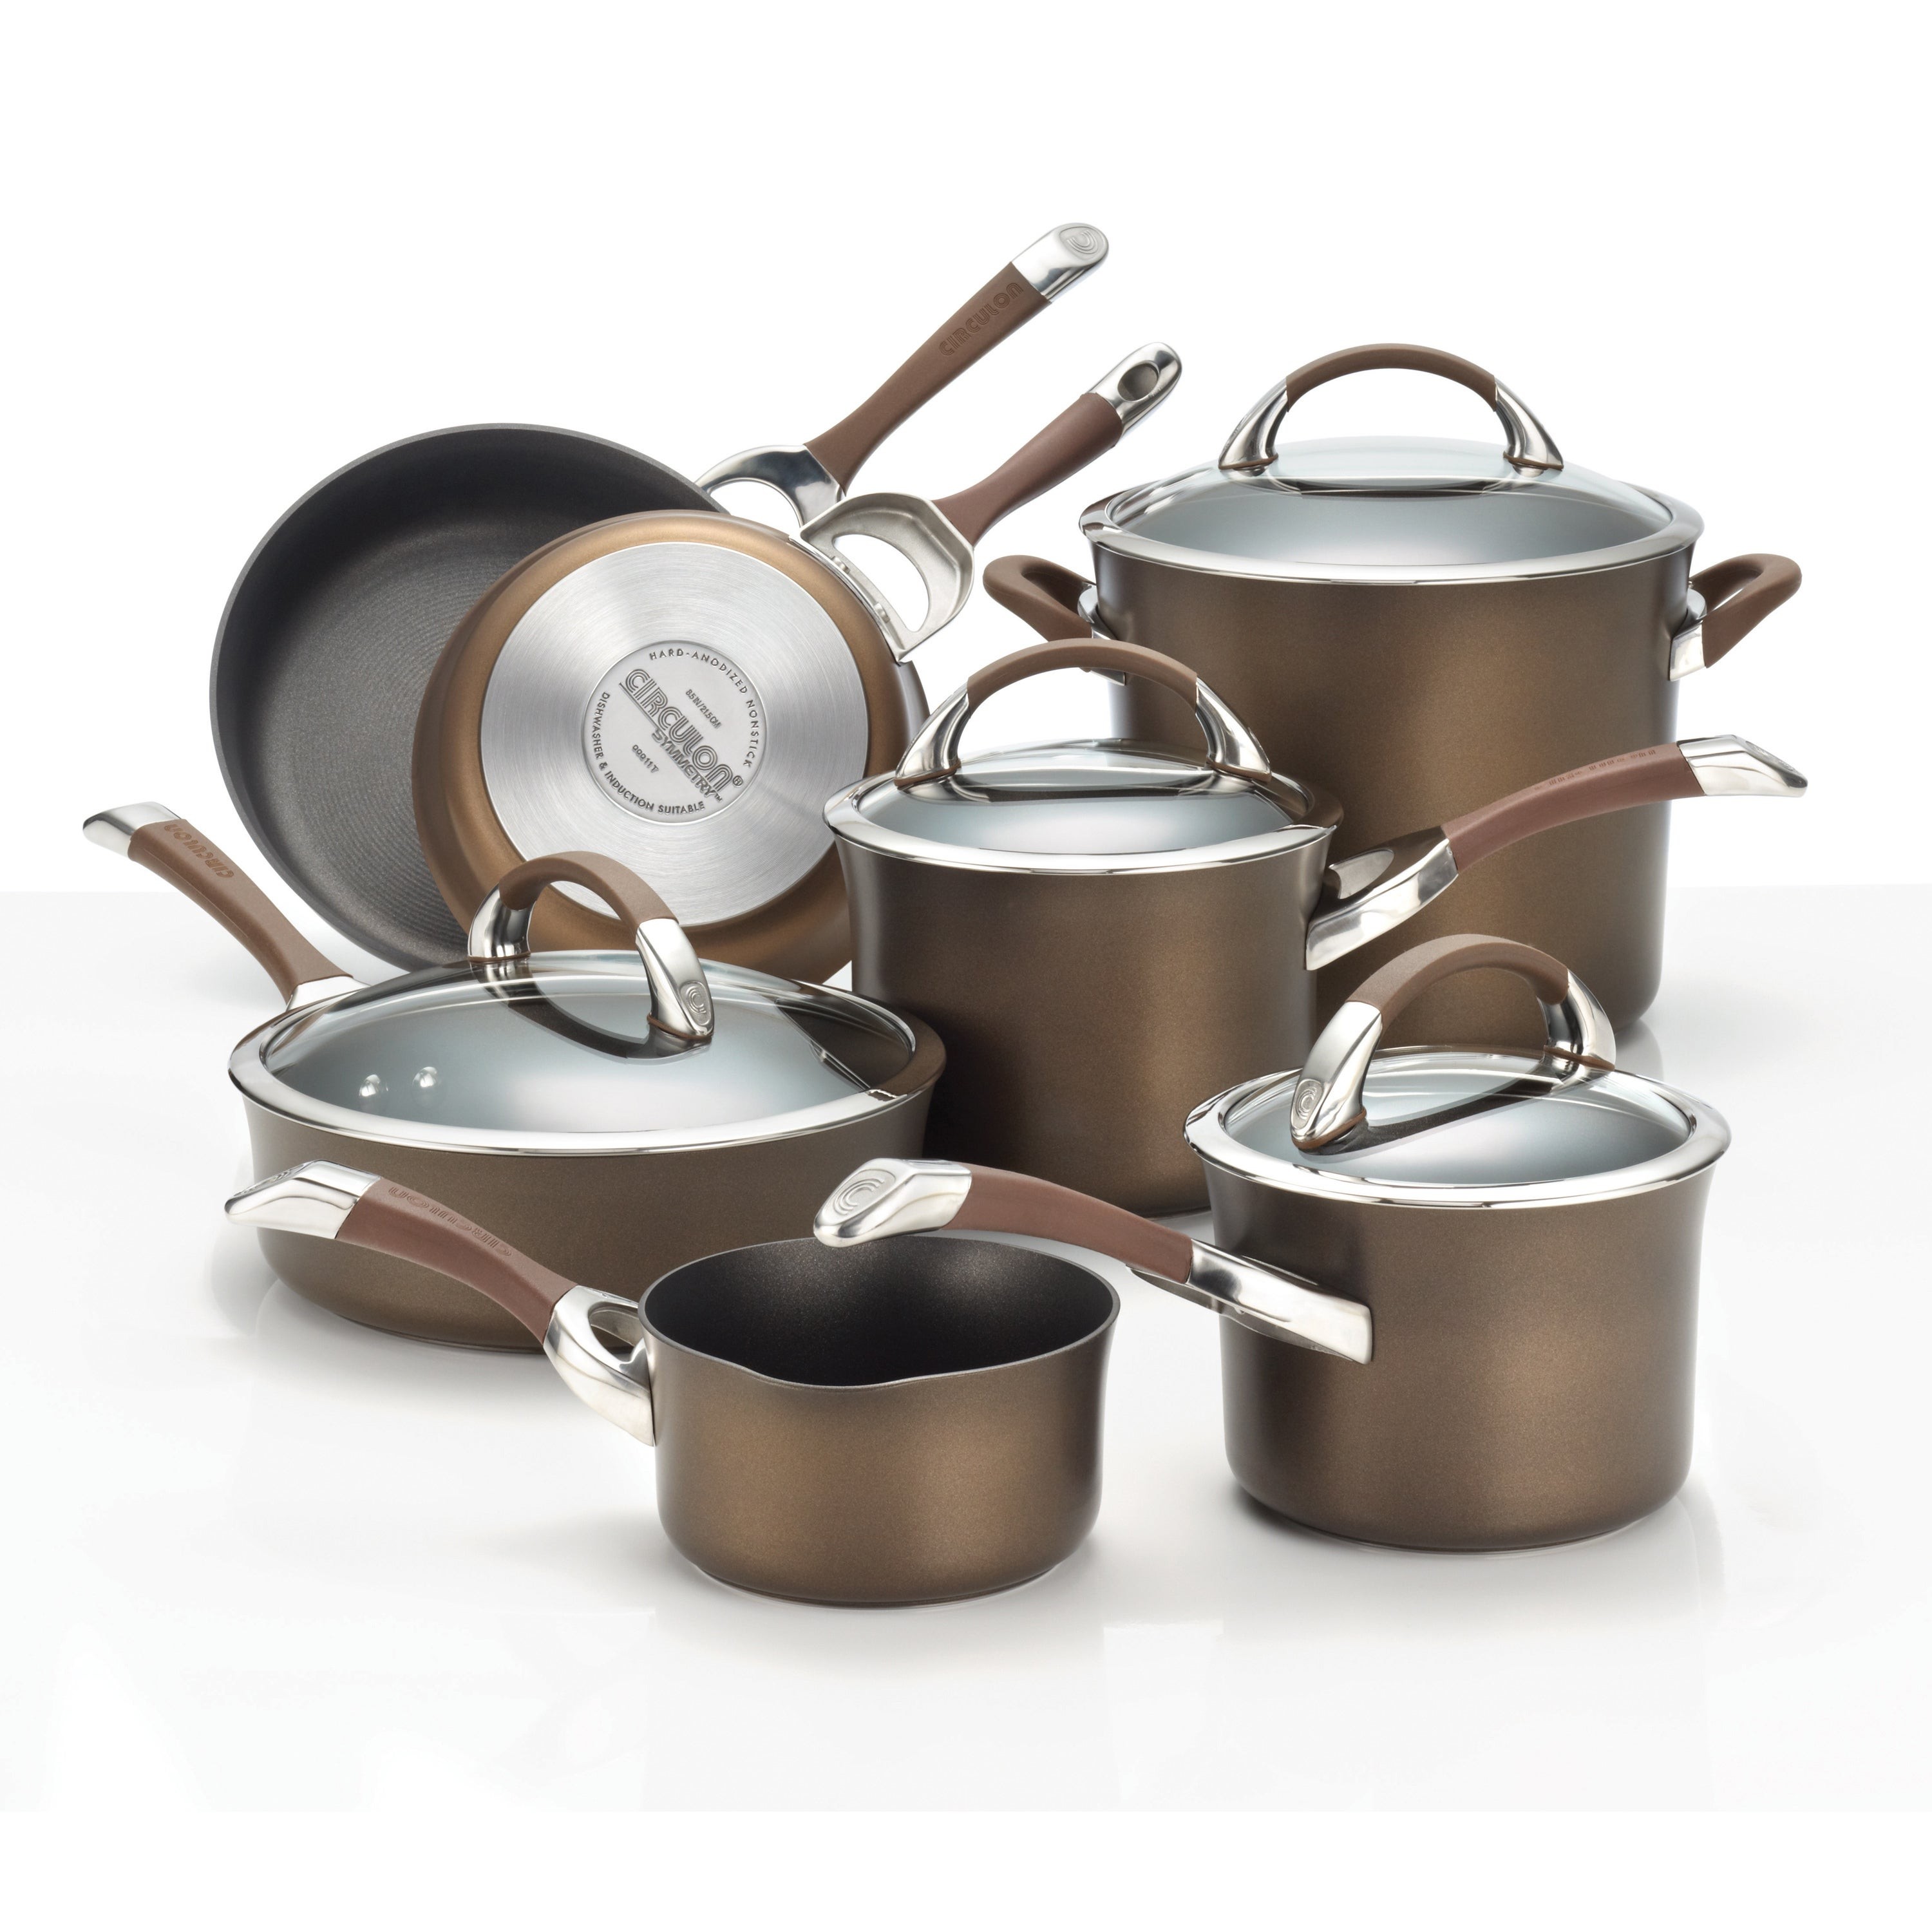 11pc Symmetry Hard Anodized Cookware Set Chocolate